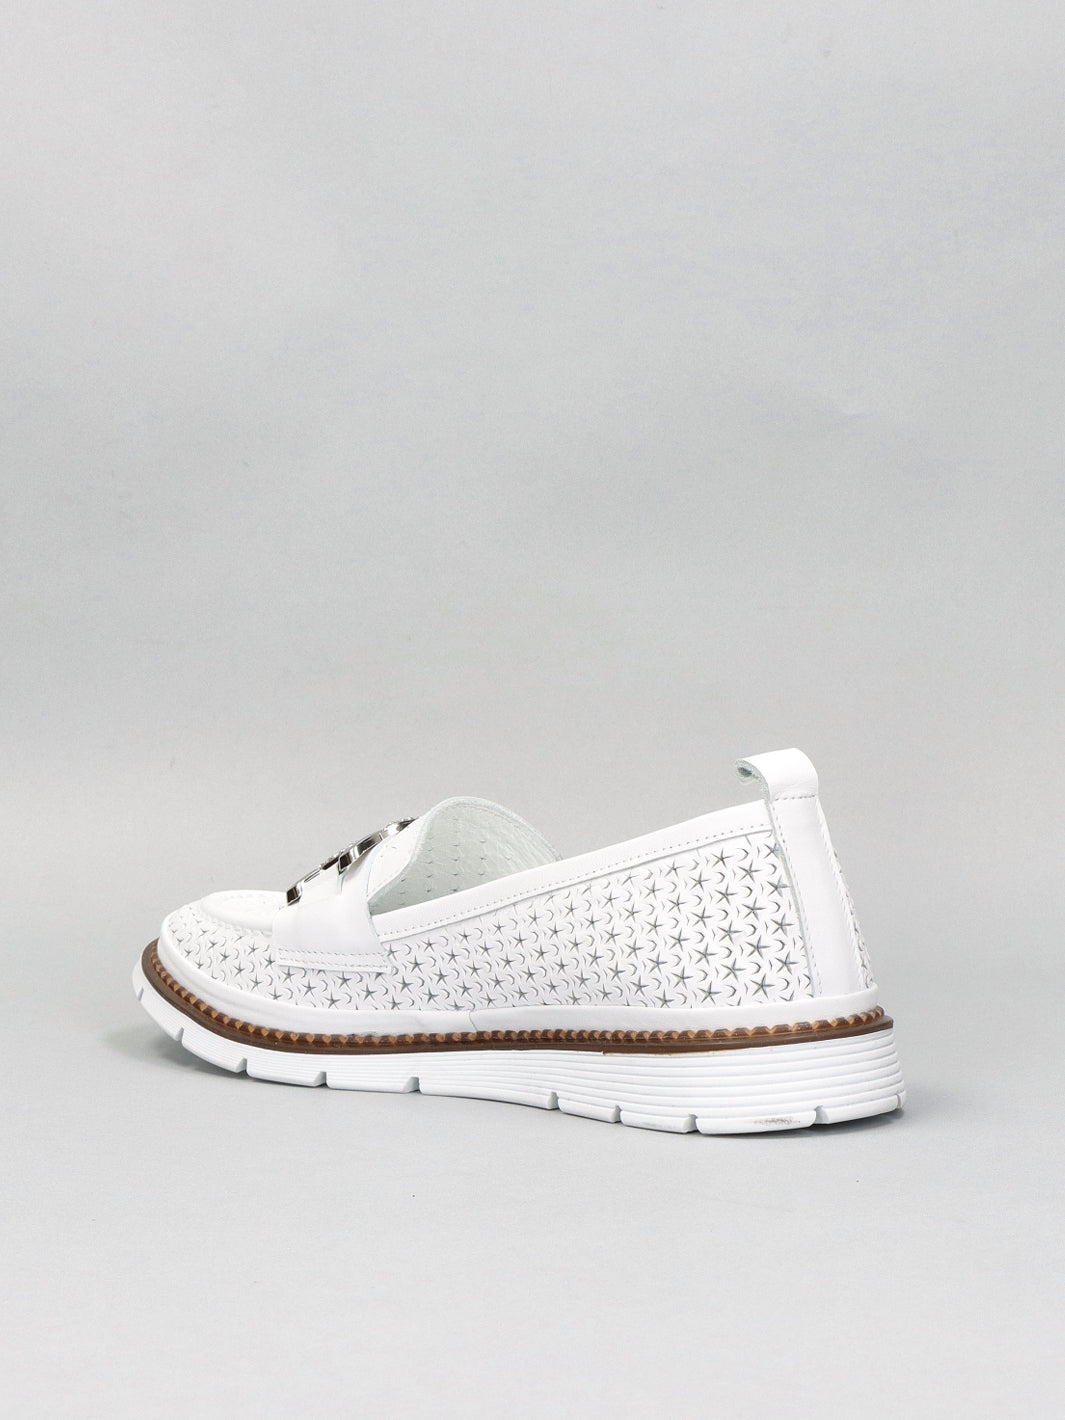 LEATHER LOW SHOES - WHITE